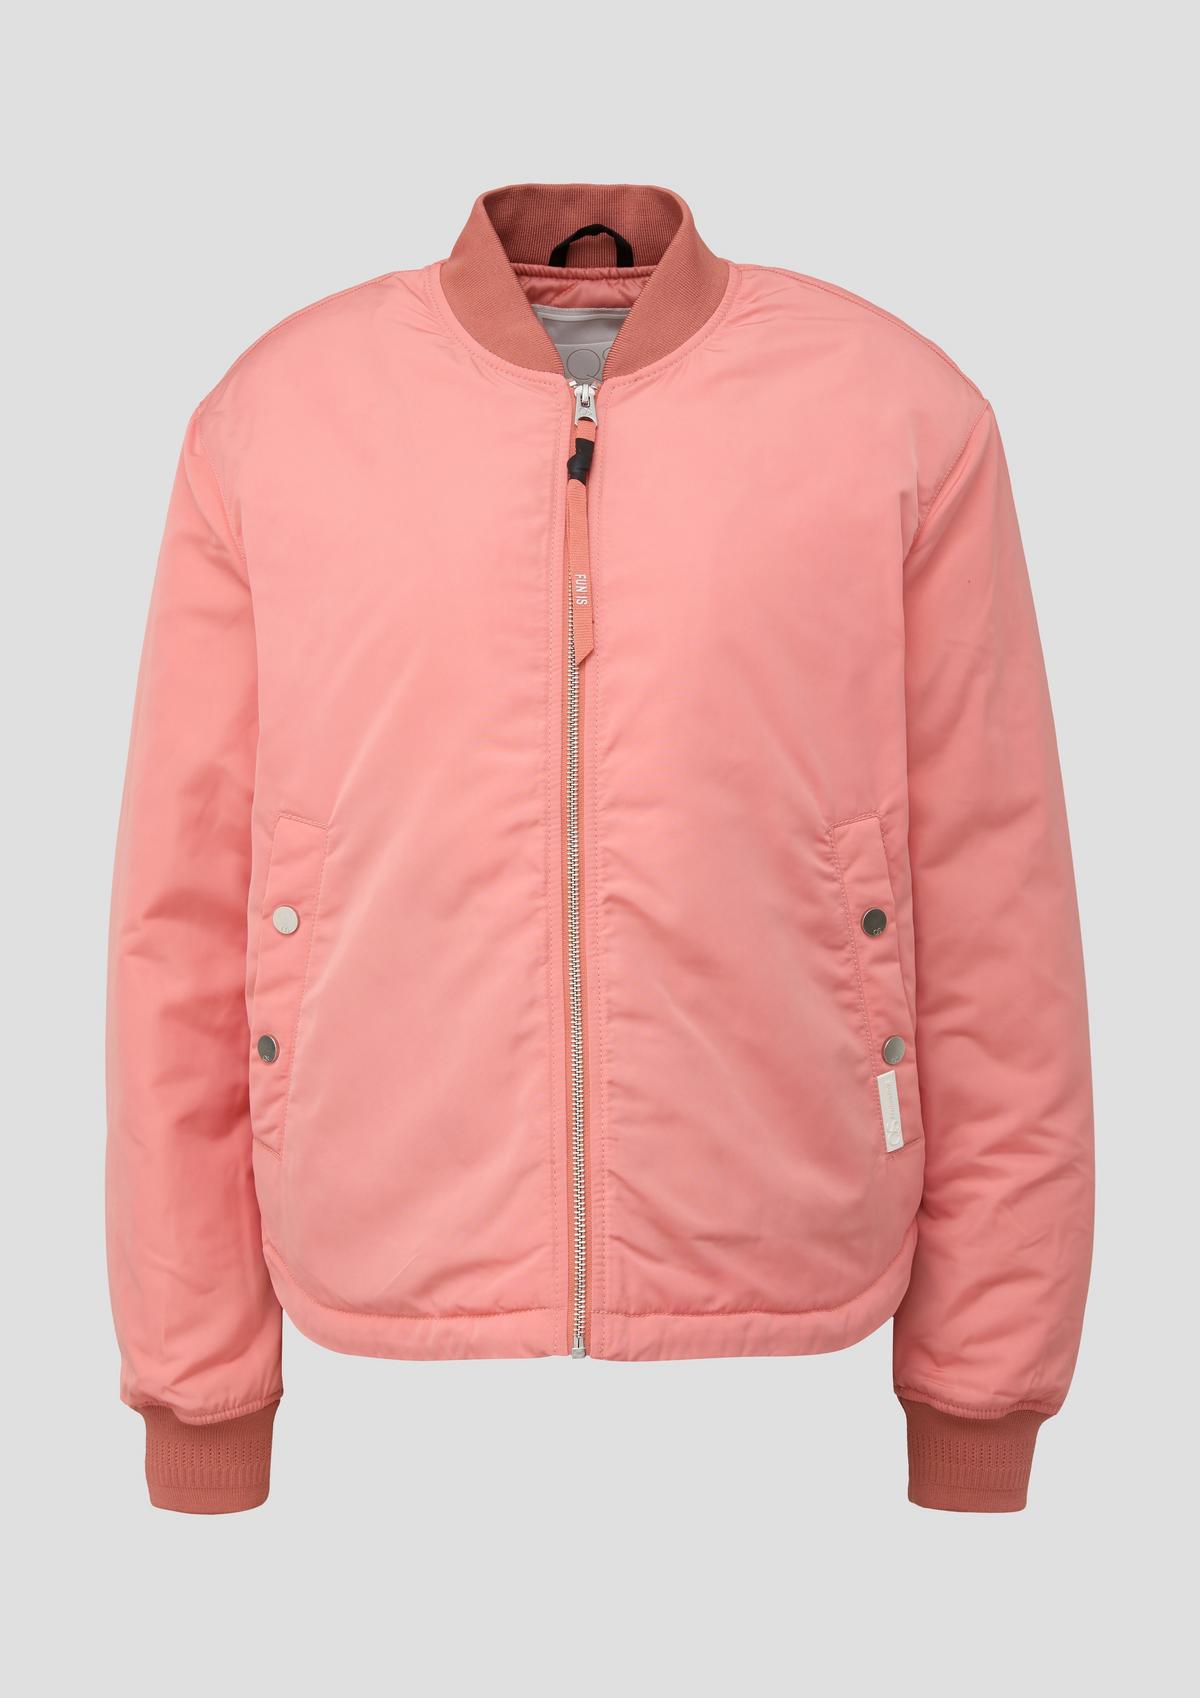 s.Oliver Bomber jacket with a stand-up collar